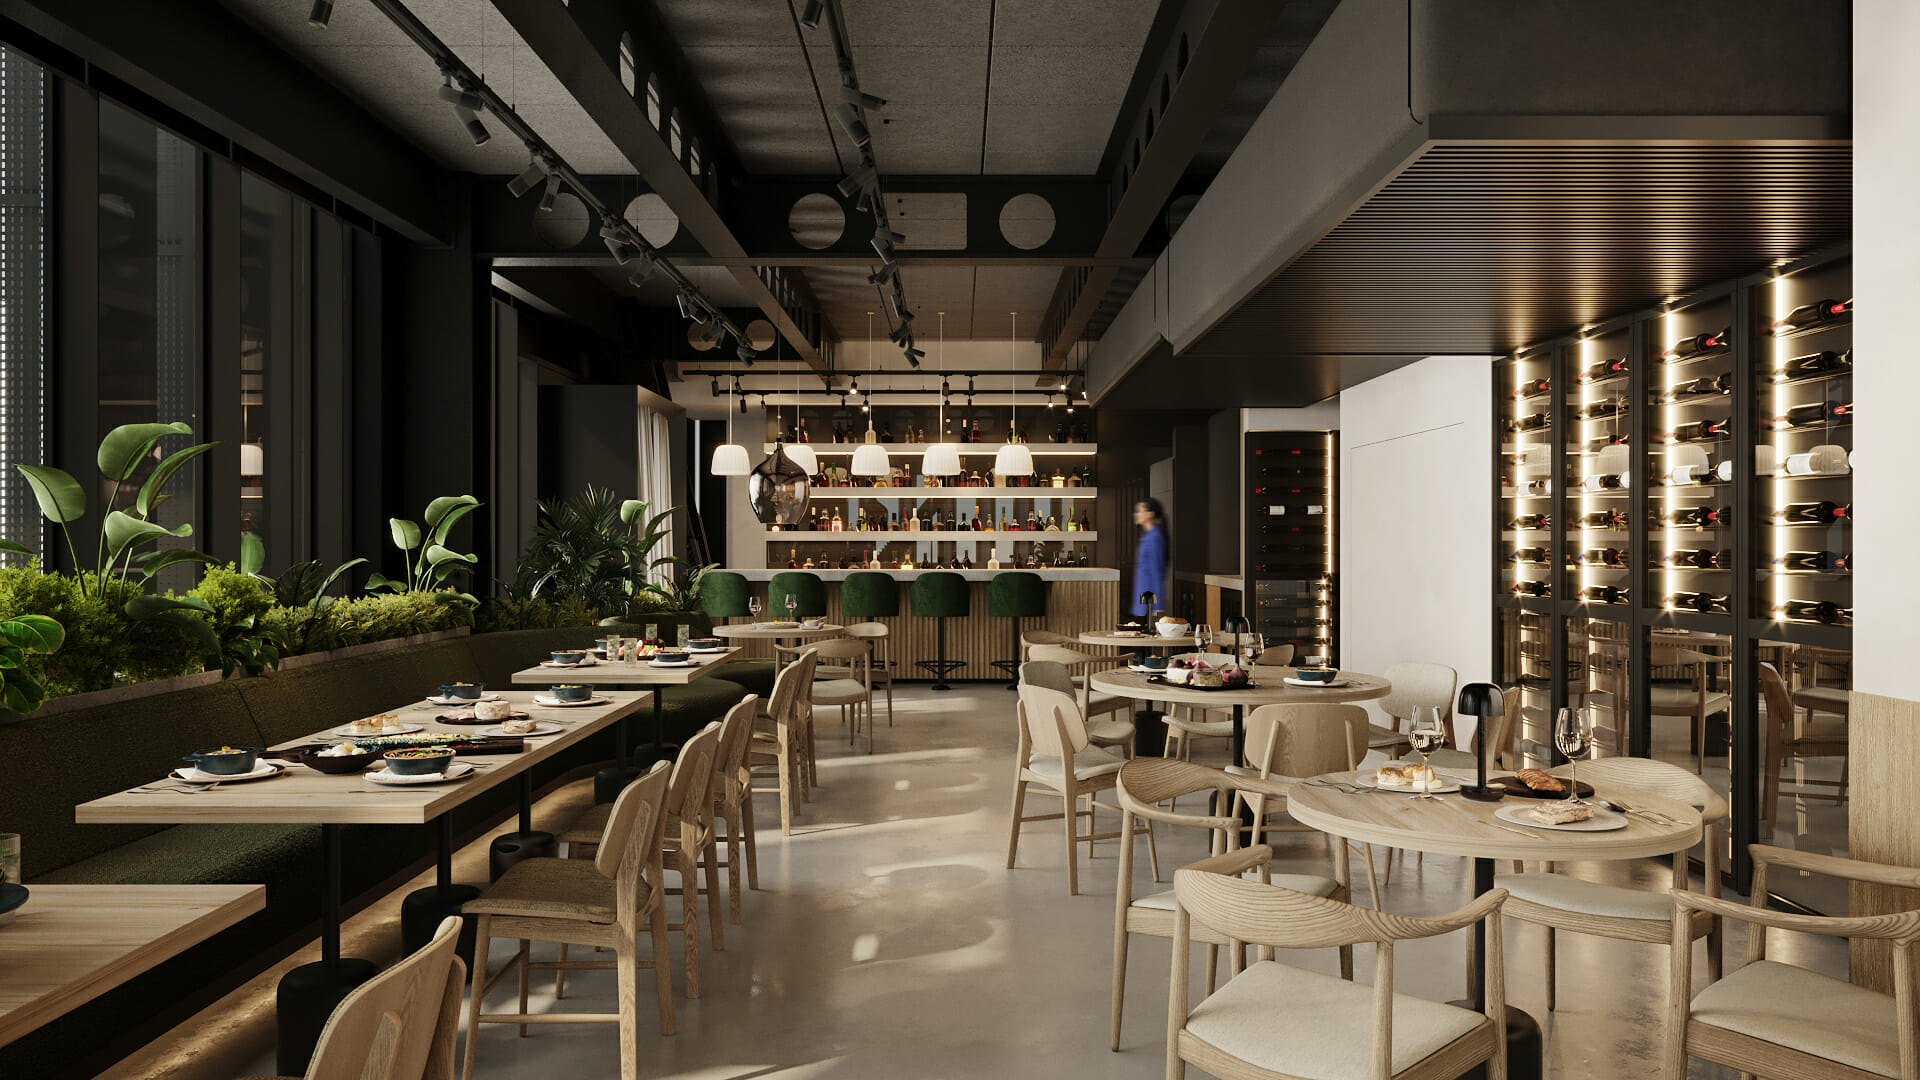 MEDITERRANEAN DINING CONCEPT CAVO TO LAUNCH AT THE OUTERNET LONDON